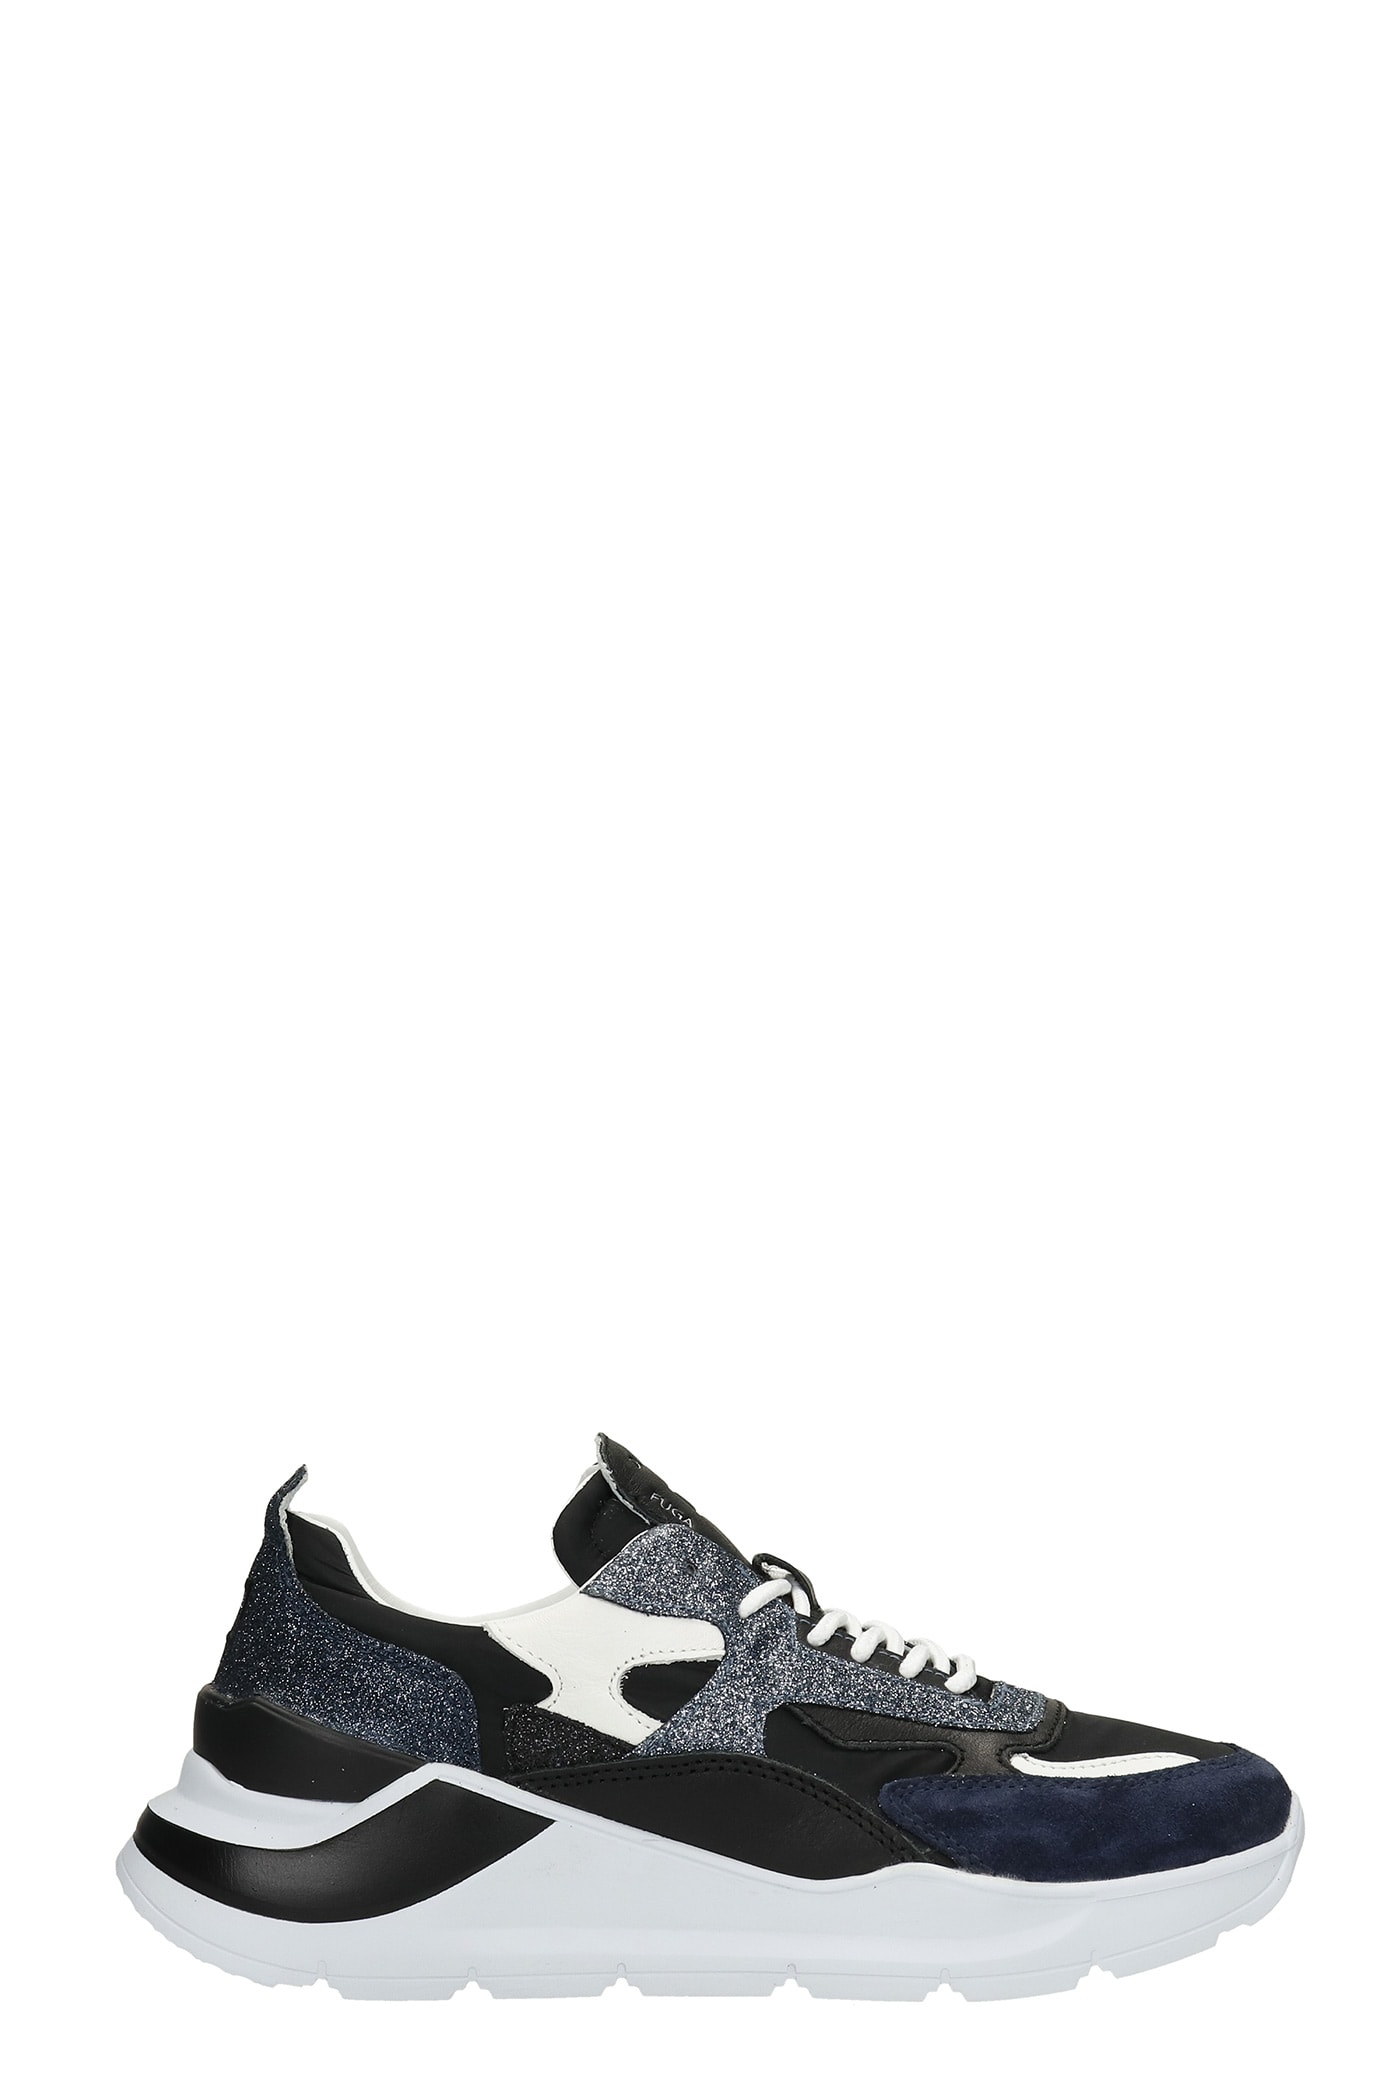 D.A.T.E. Fuga Sneakers In Black Synthetic Fibers